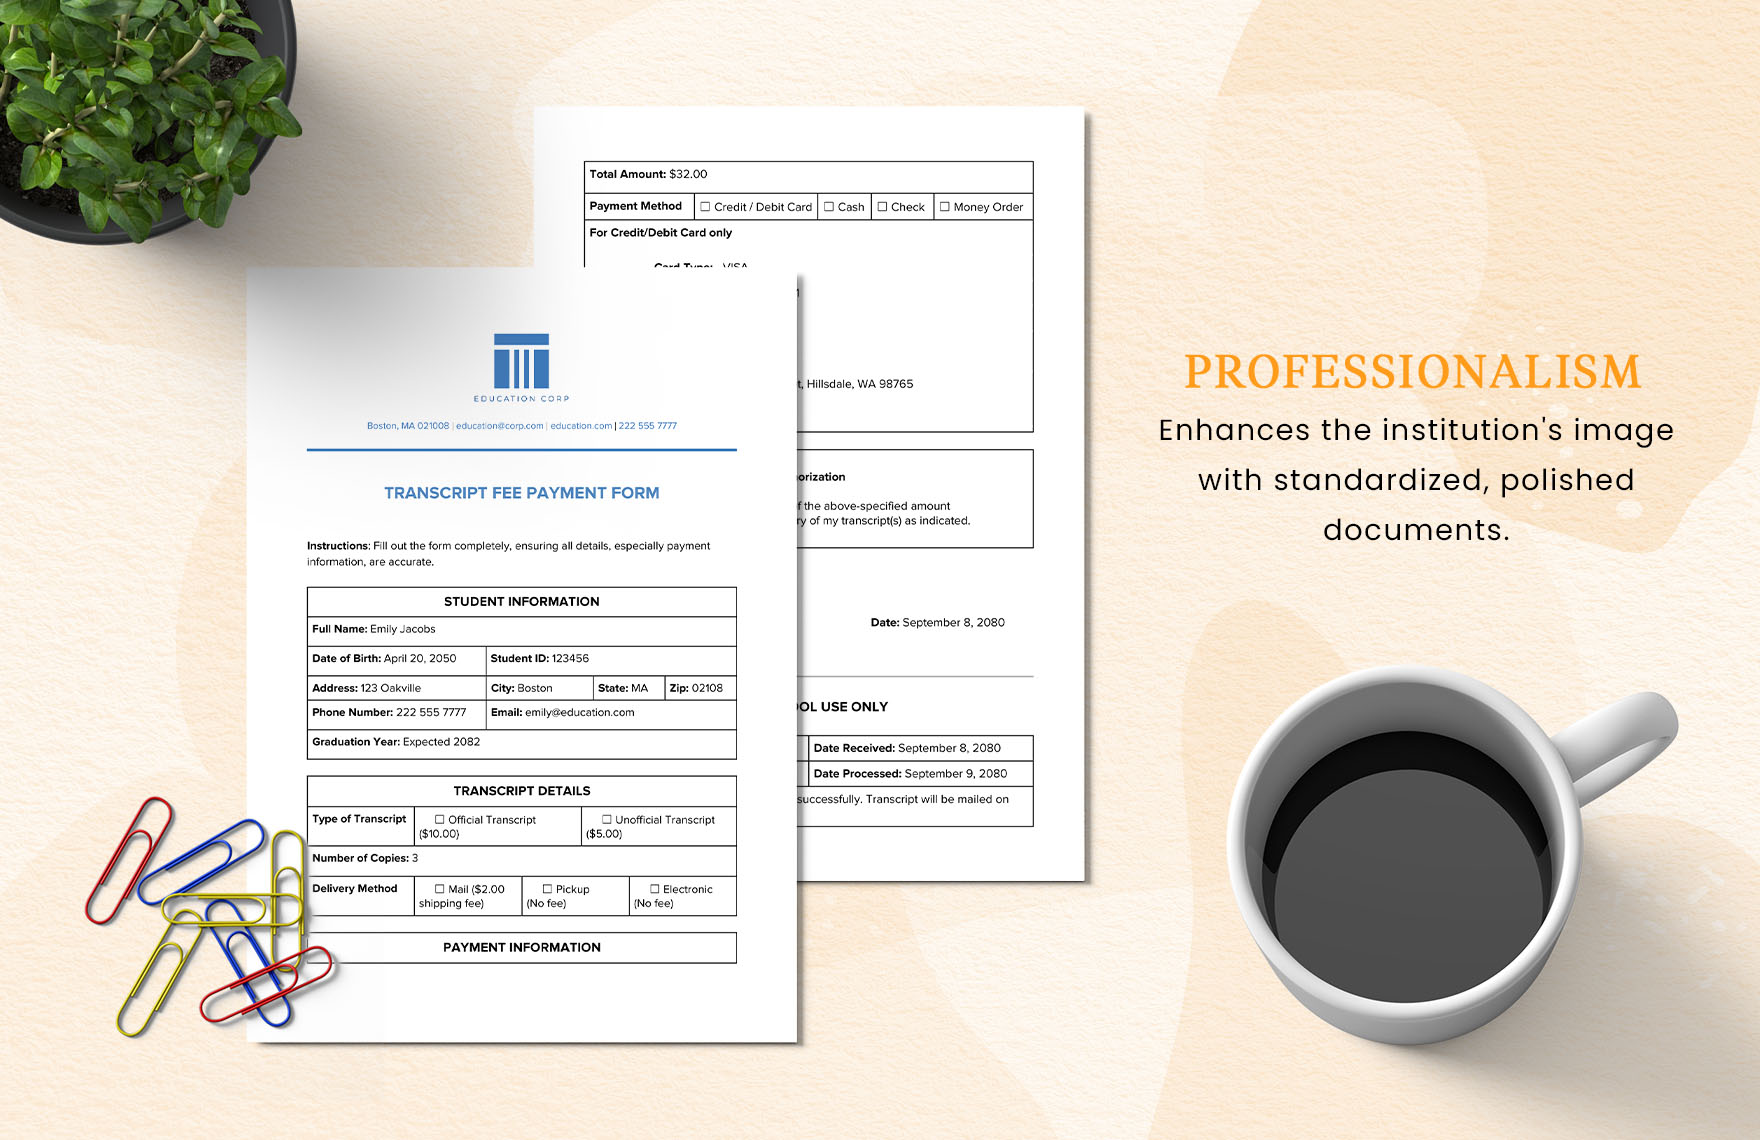 Transcript Fee Payment Form Template